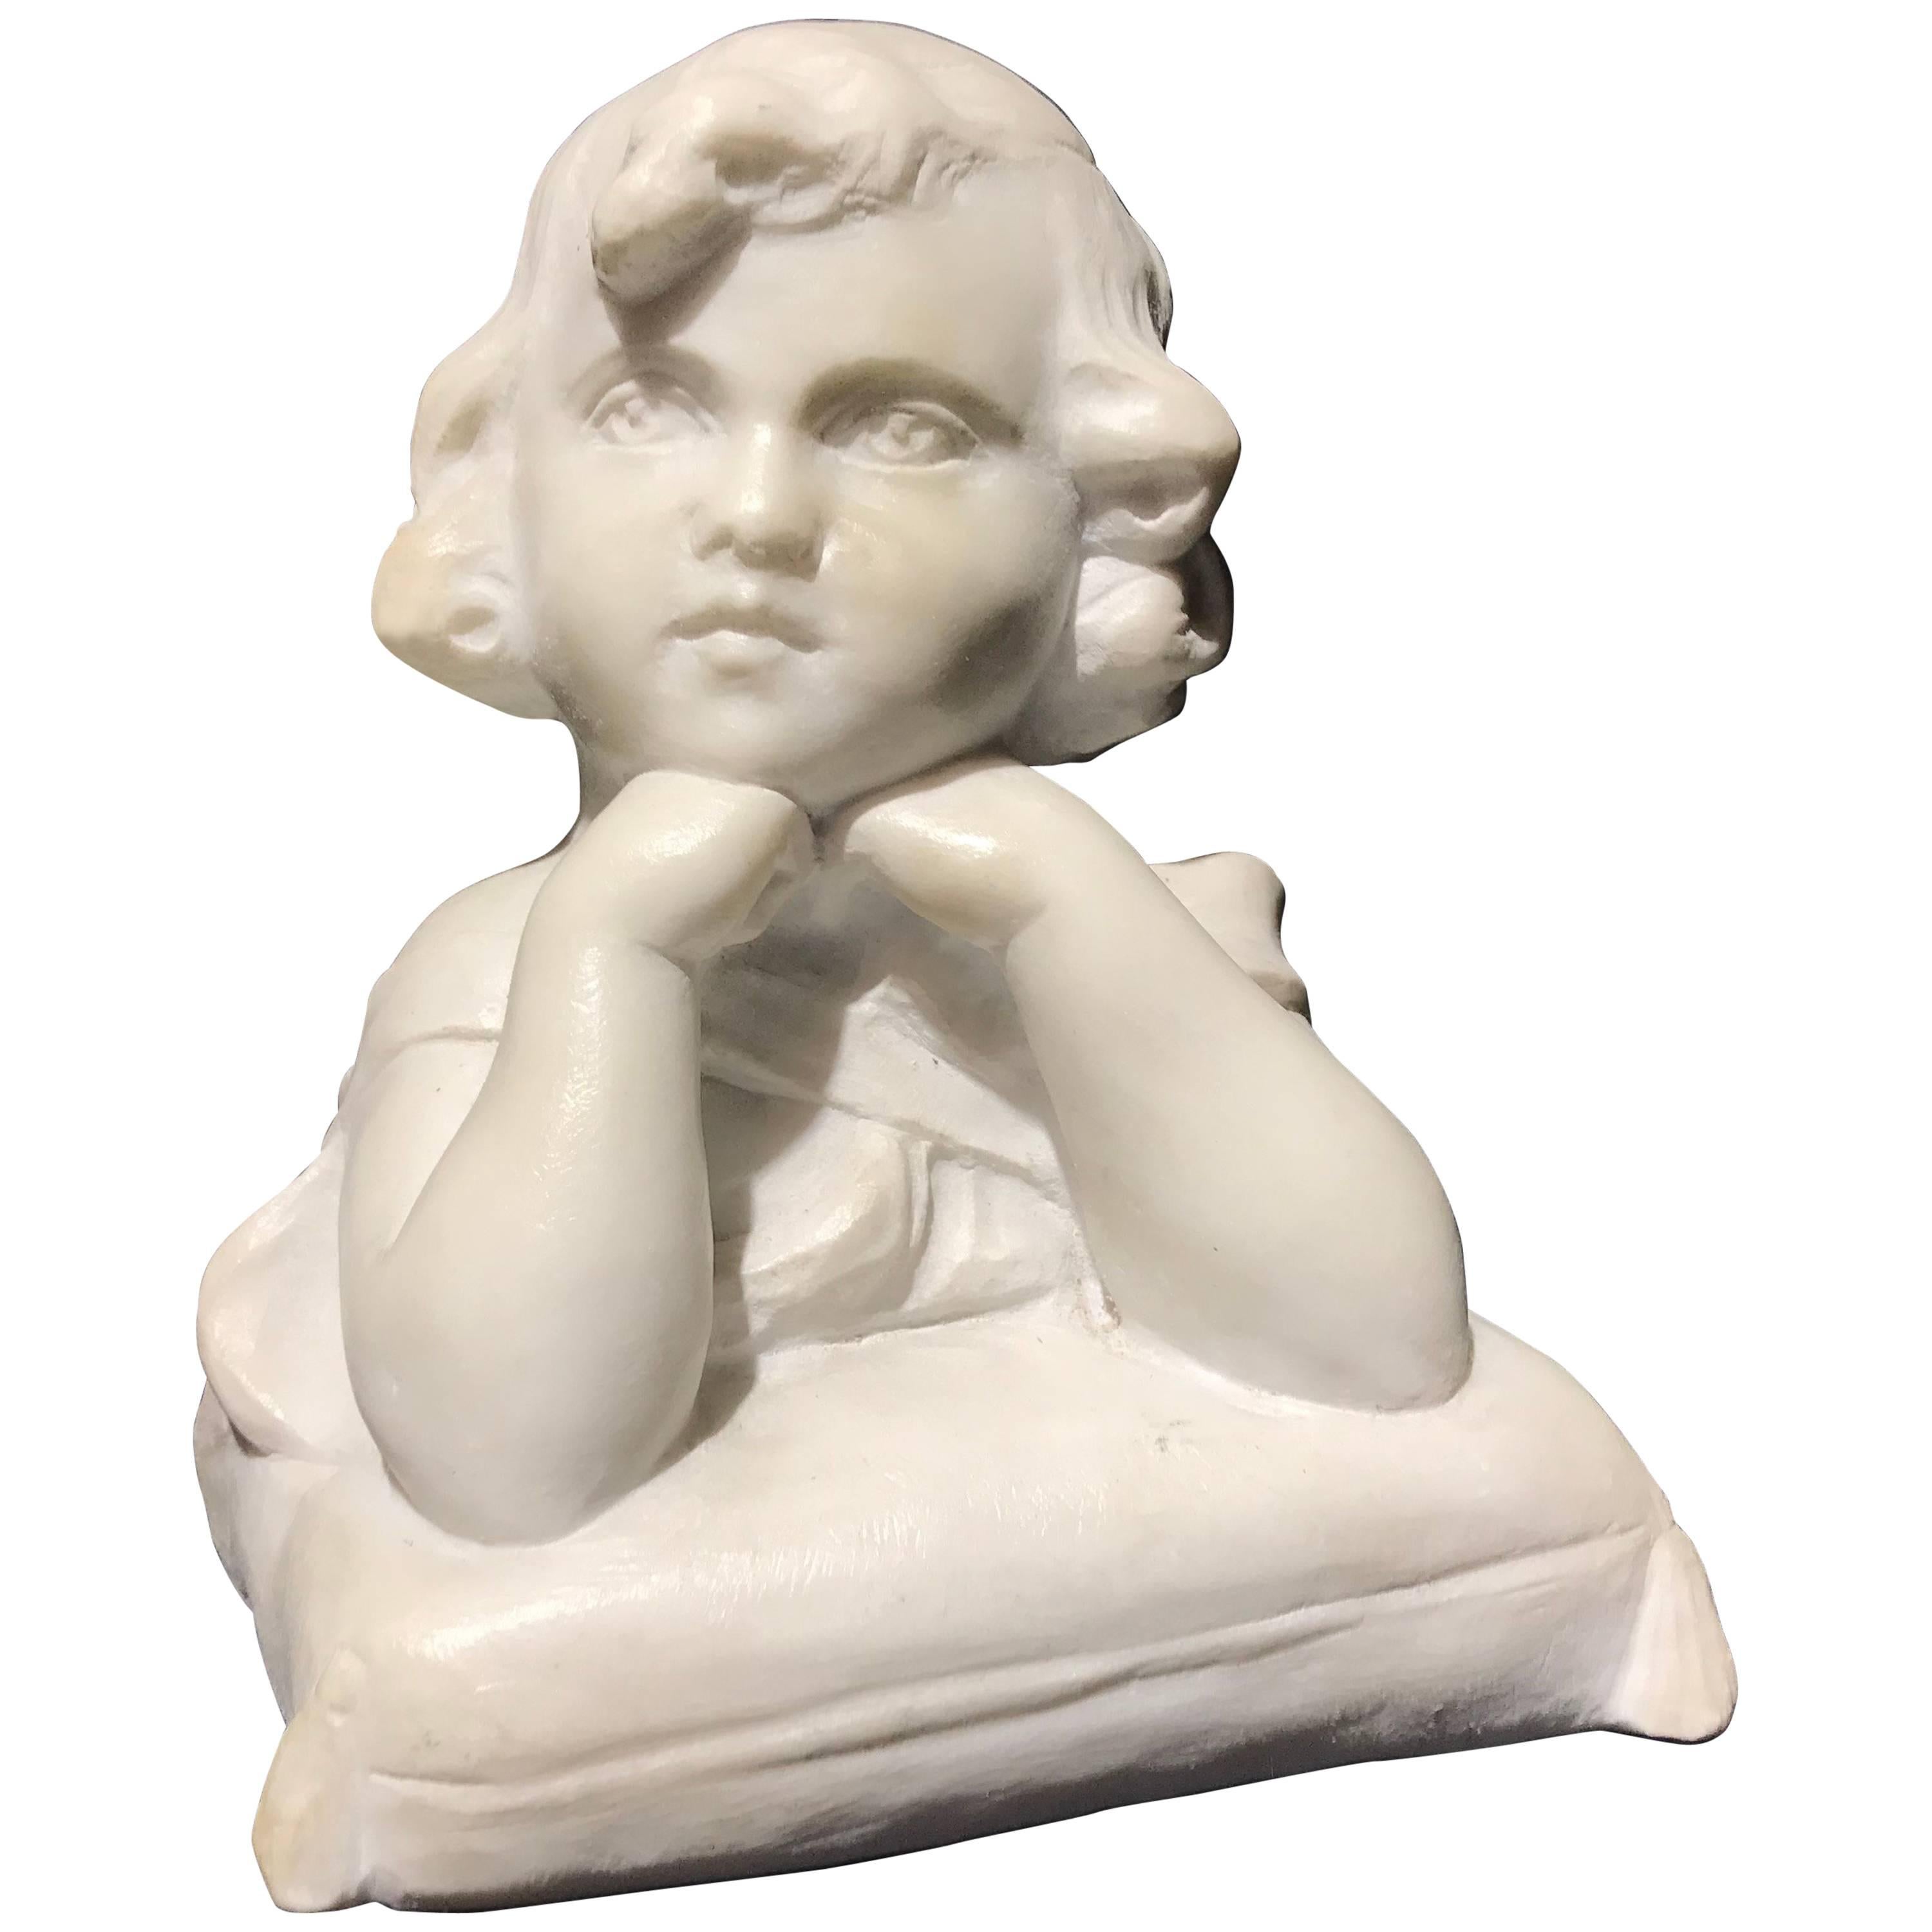 19th Century Neoclassical Style Italian White Marble Sculpture of Angel